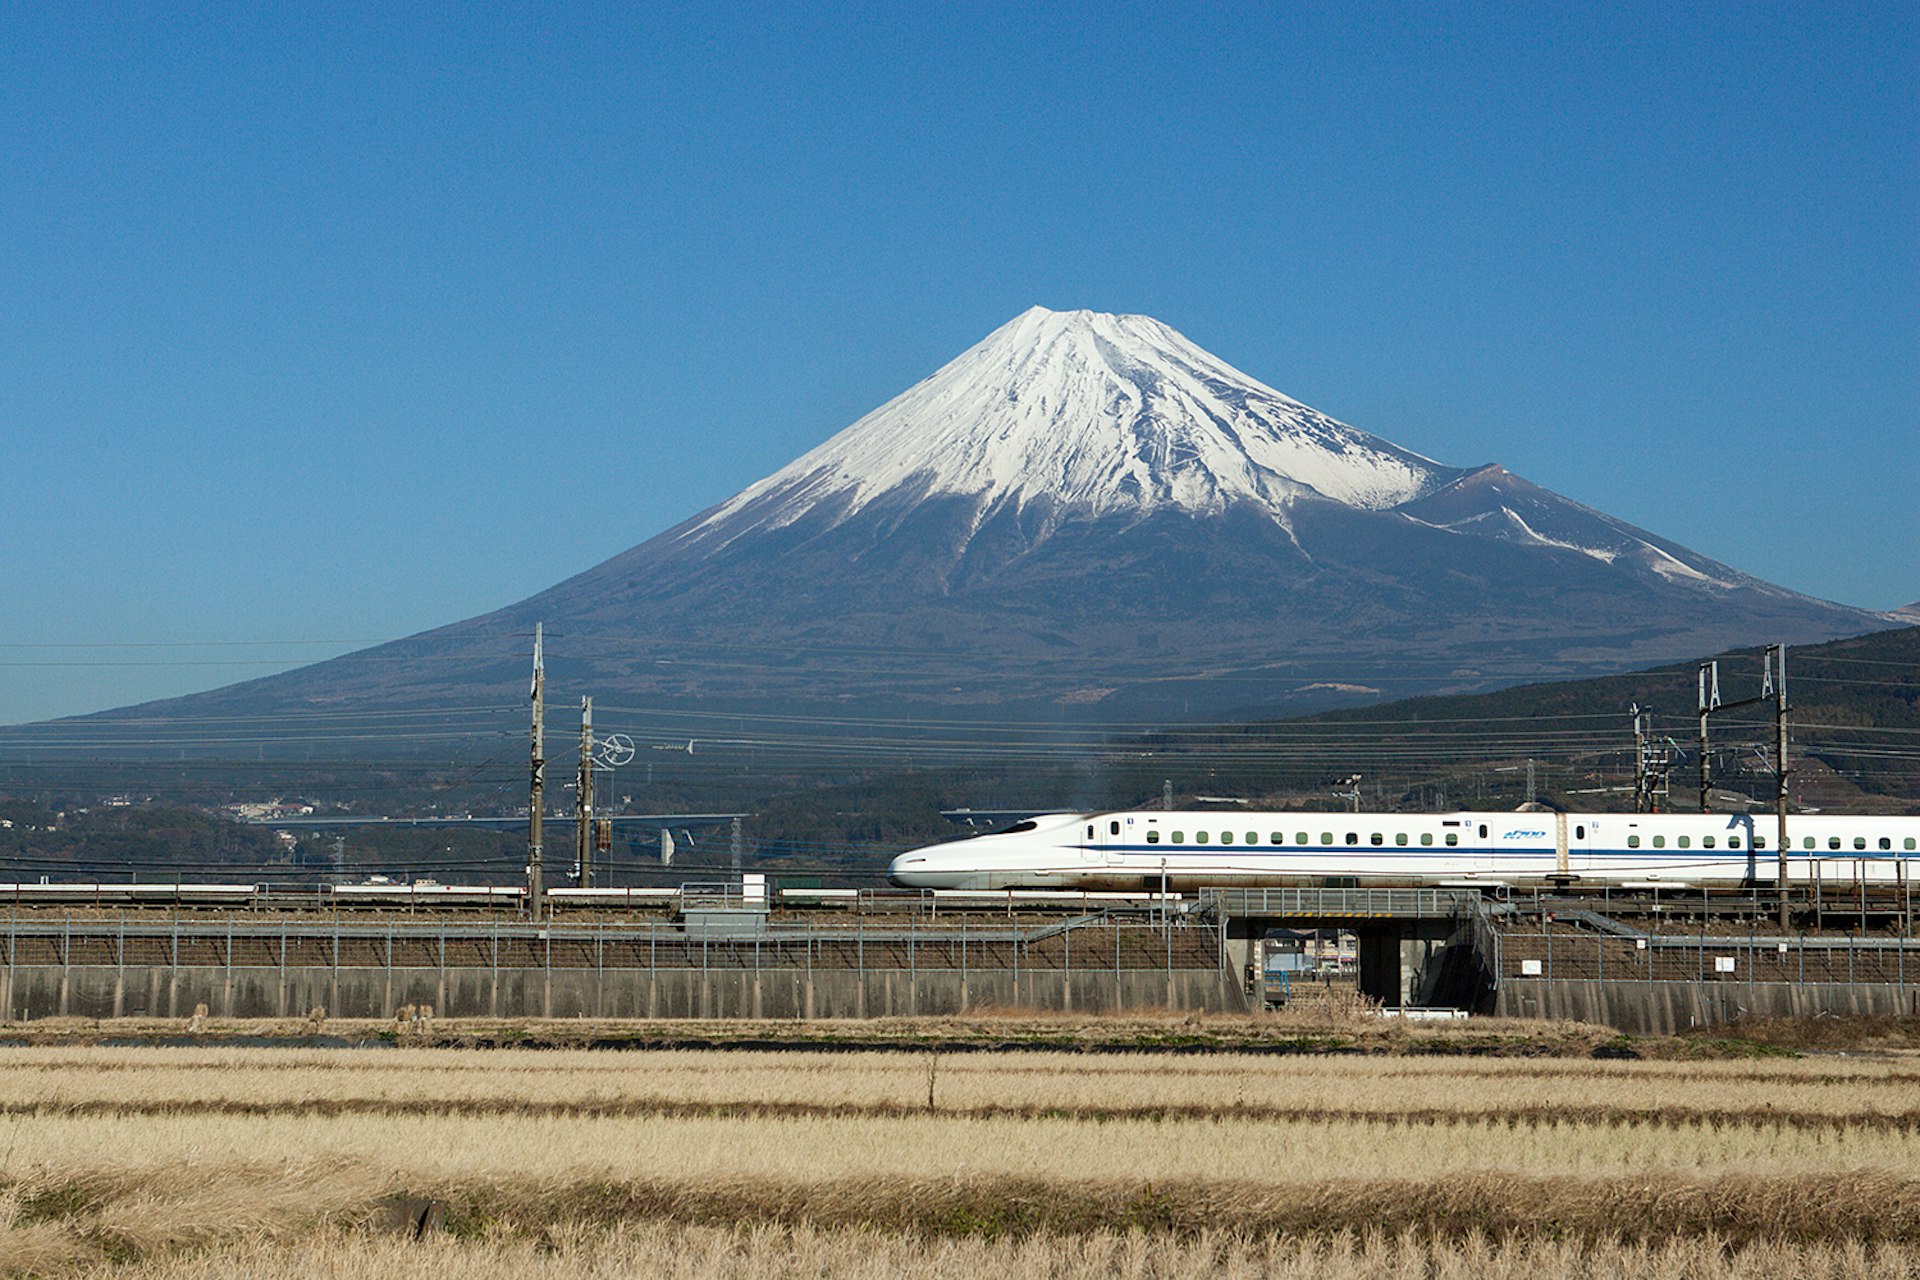 A bullet train in Japan passing snow-covered Mount Fuji with a blue-sky backdrop 